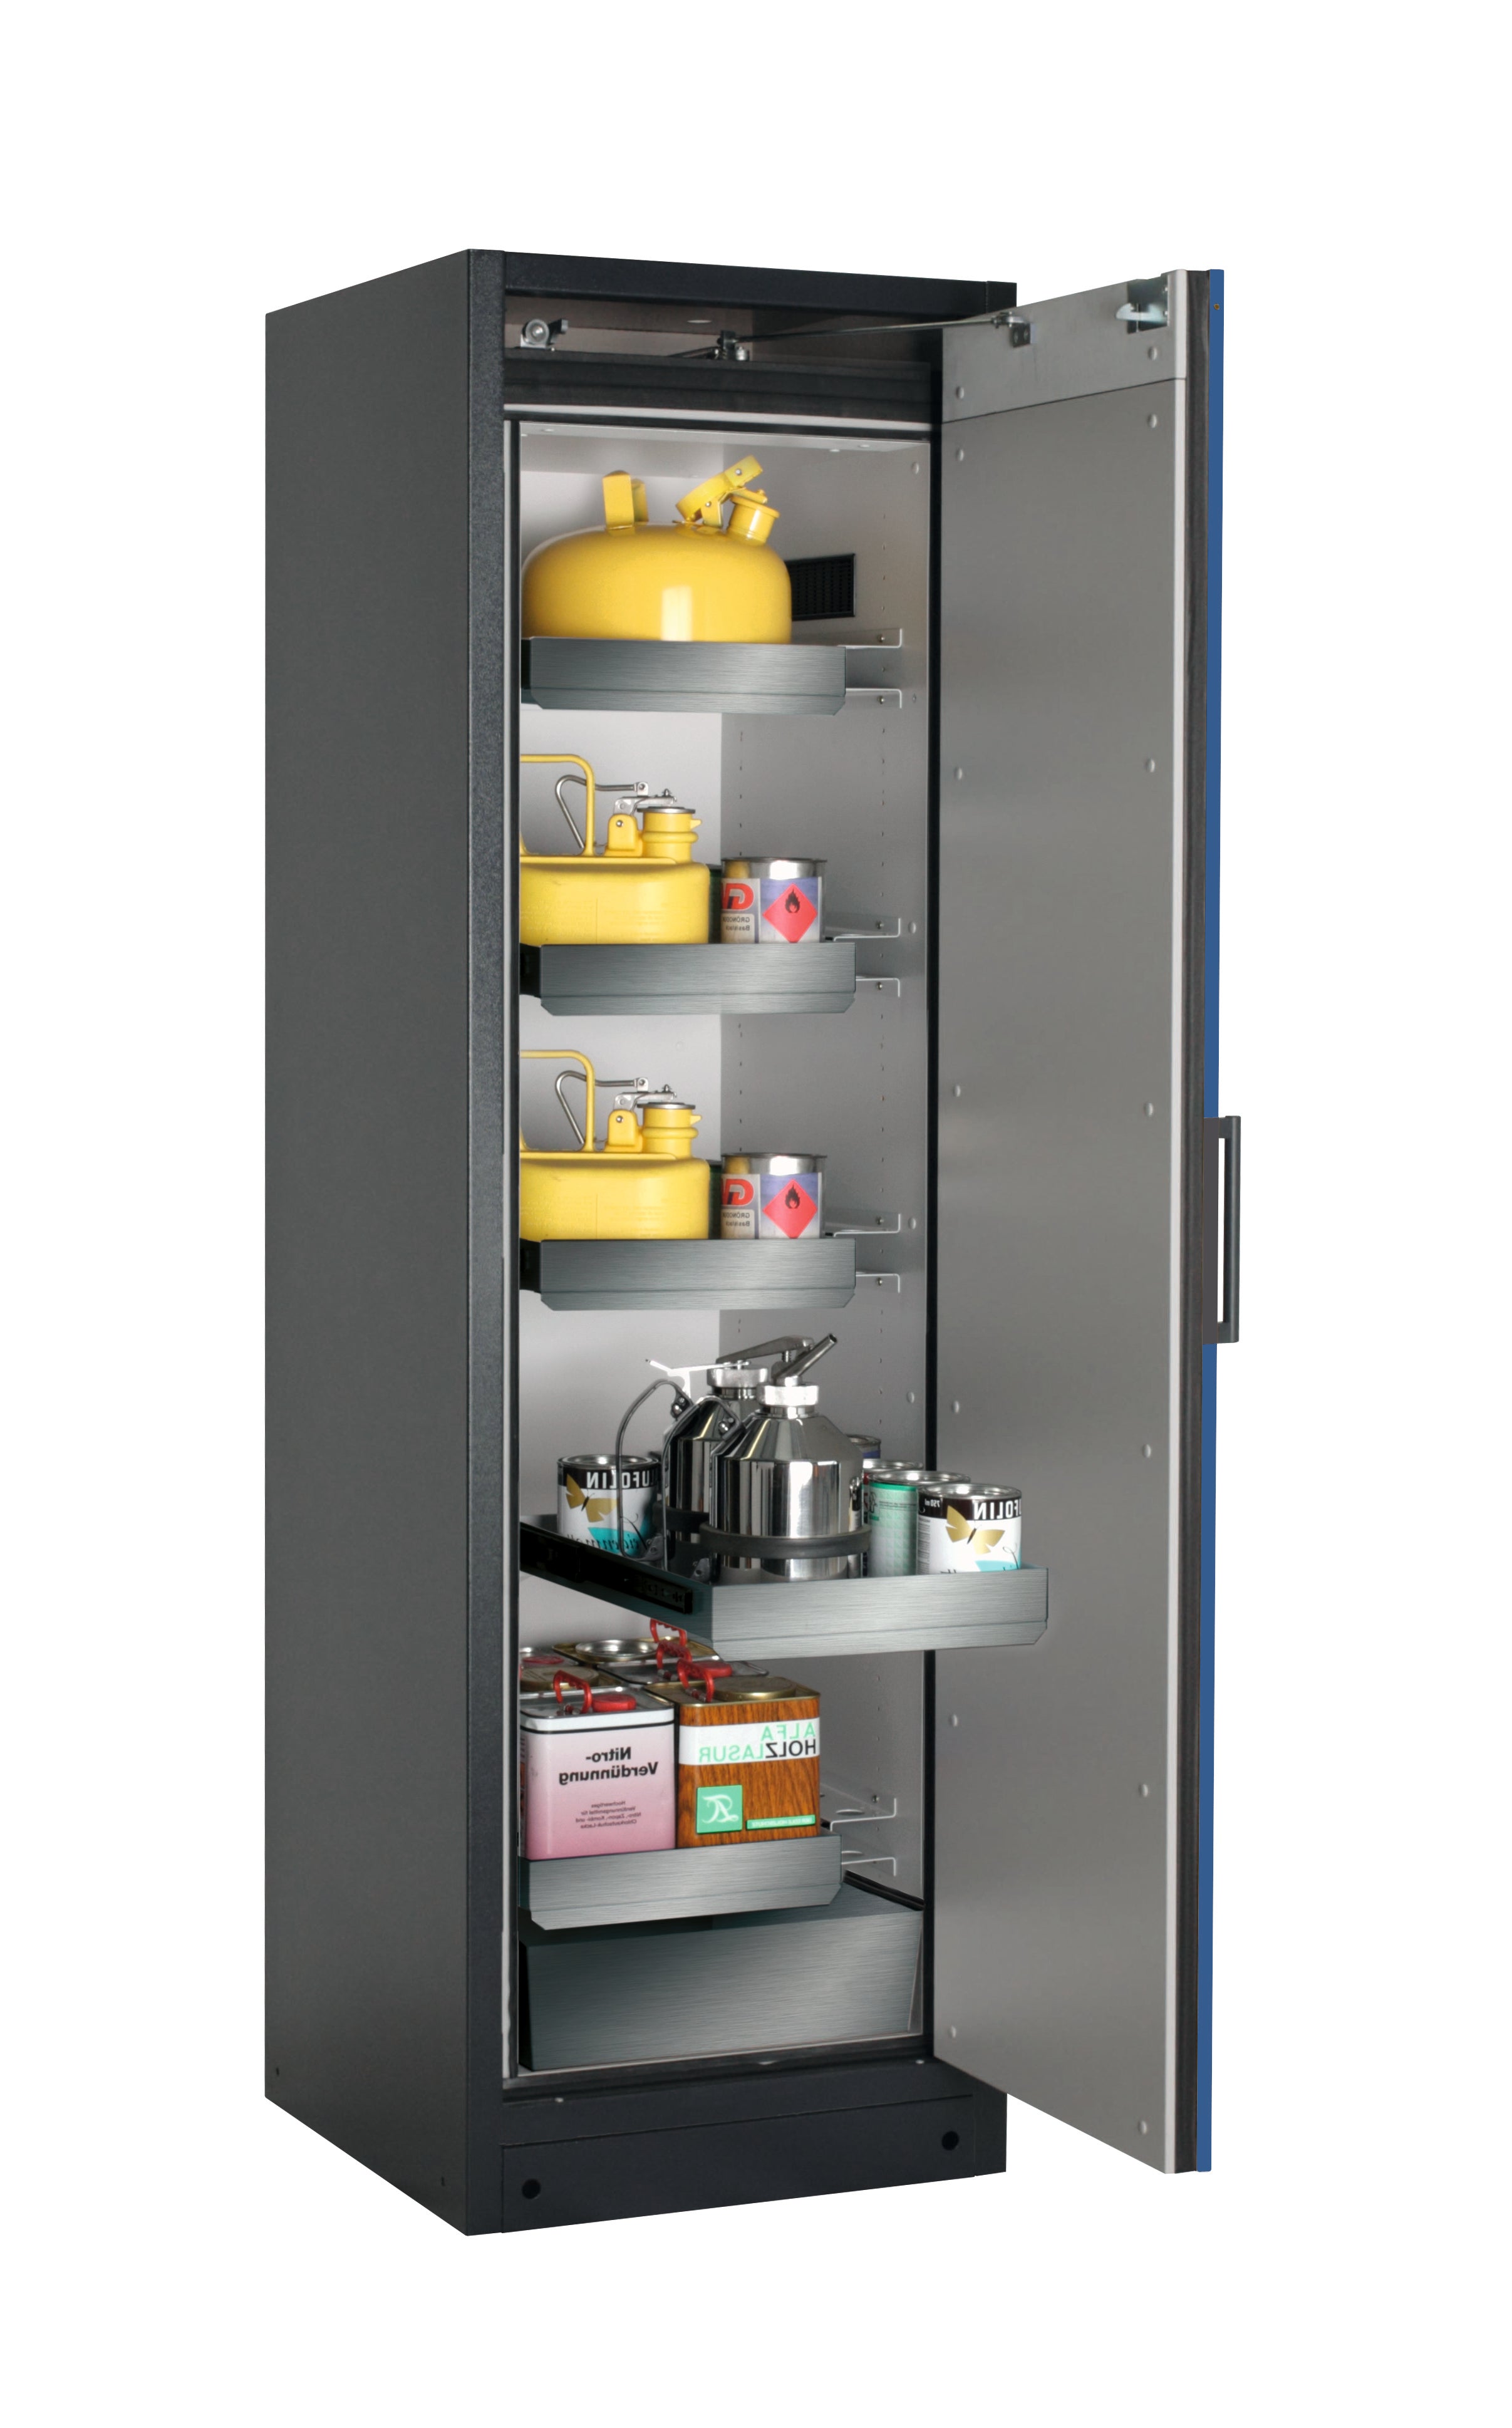 Type 90 safety storage cabinet Q-CLASSIC-90 model Q90.195.060.R in gentian blue RAL 5010 with 4x drawer (standard) (stainless steel 1.4301),